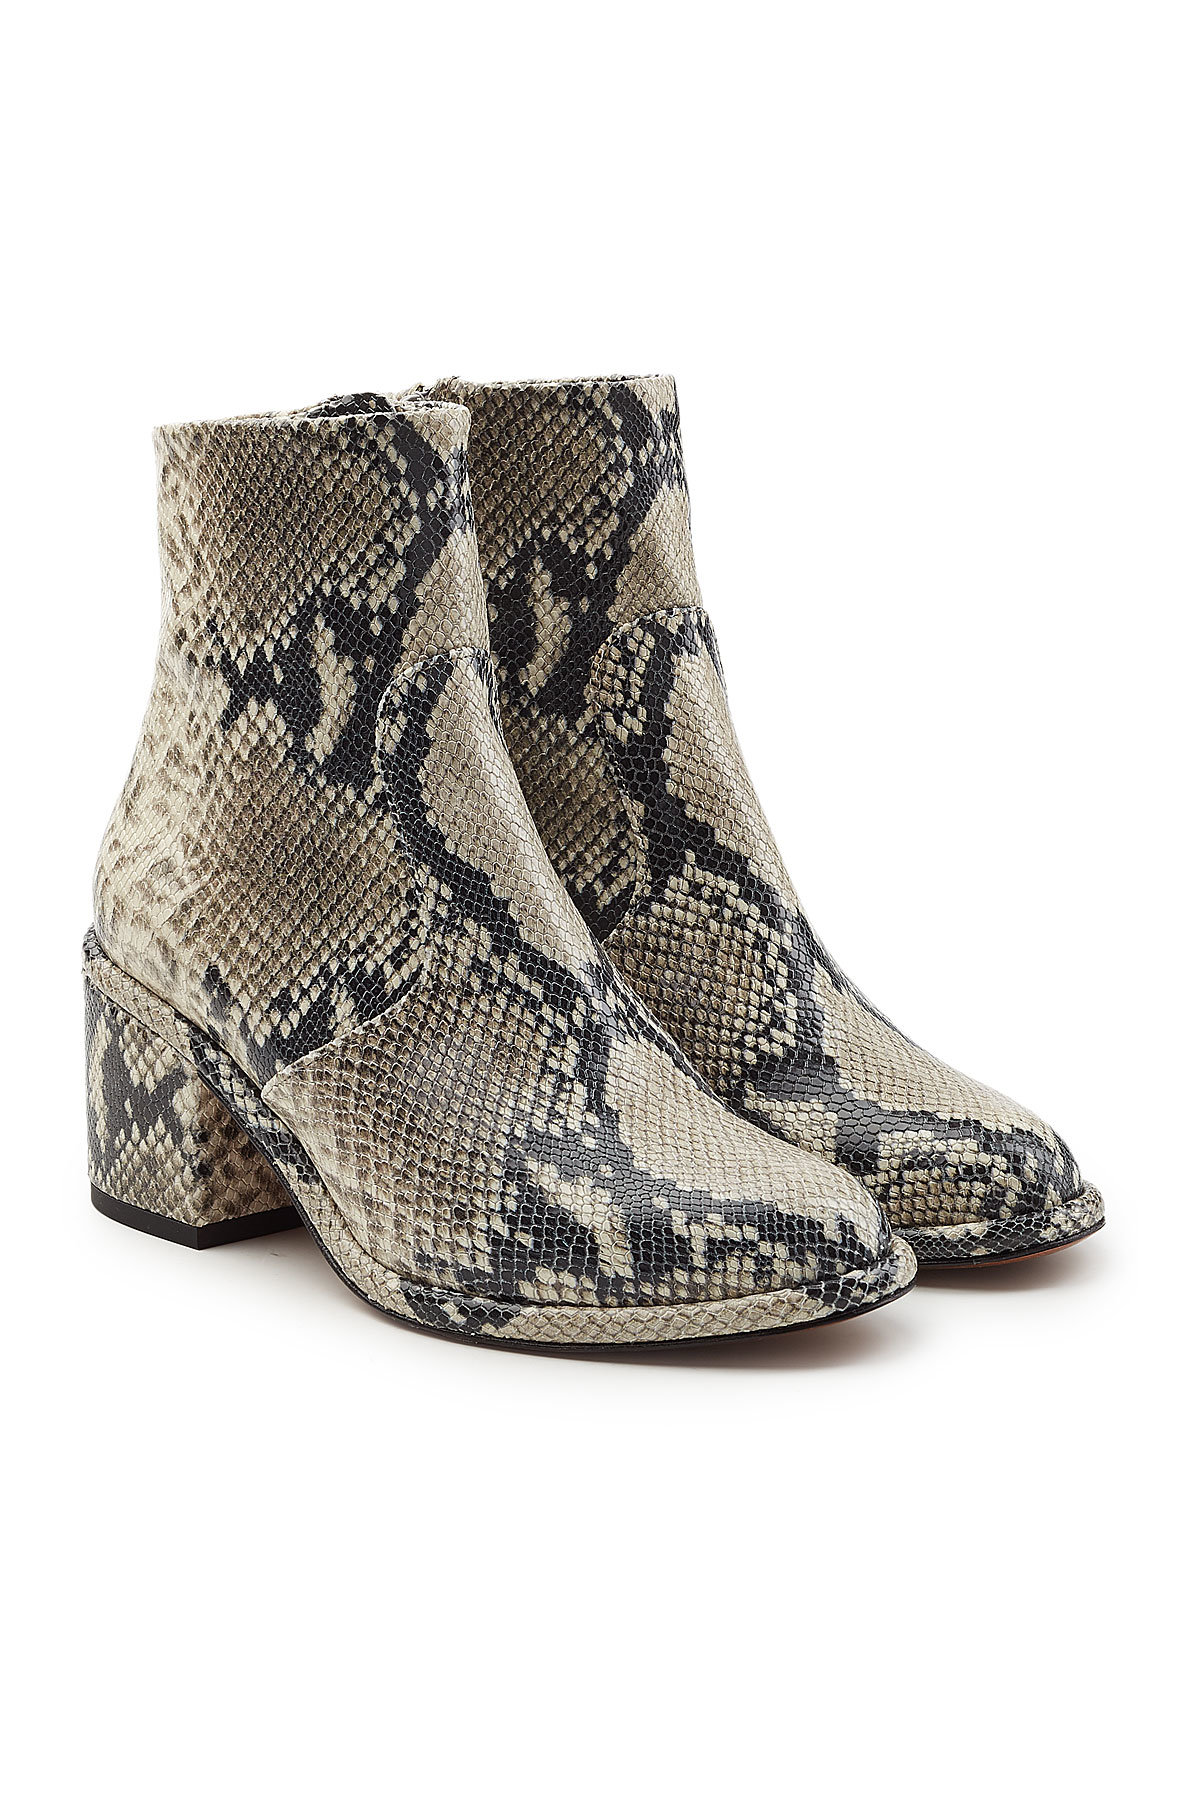 Robert Clergerie - Snakeskin Printed Leather Ankle Boots